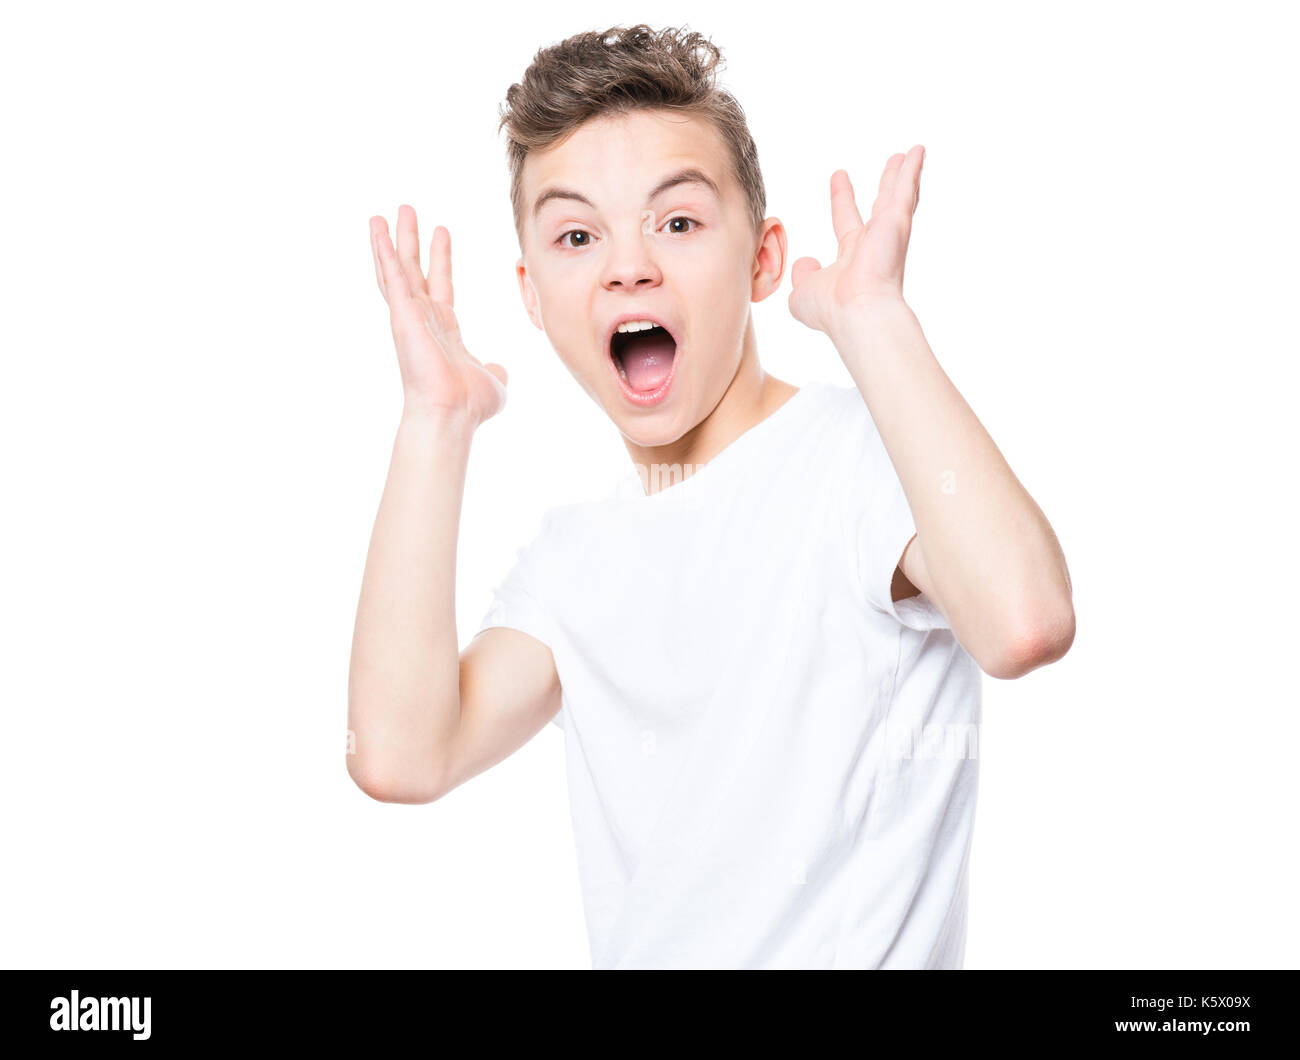 Emotional portrait of amazed or surprised teen boy in white t-shirt. Funny cute cheerful child screaming with wide open mouth, isolated on white backg Stock Photo